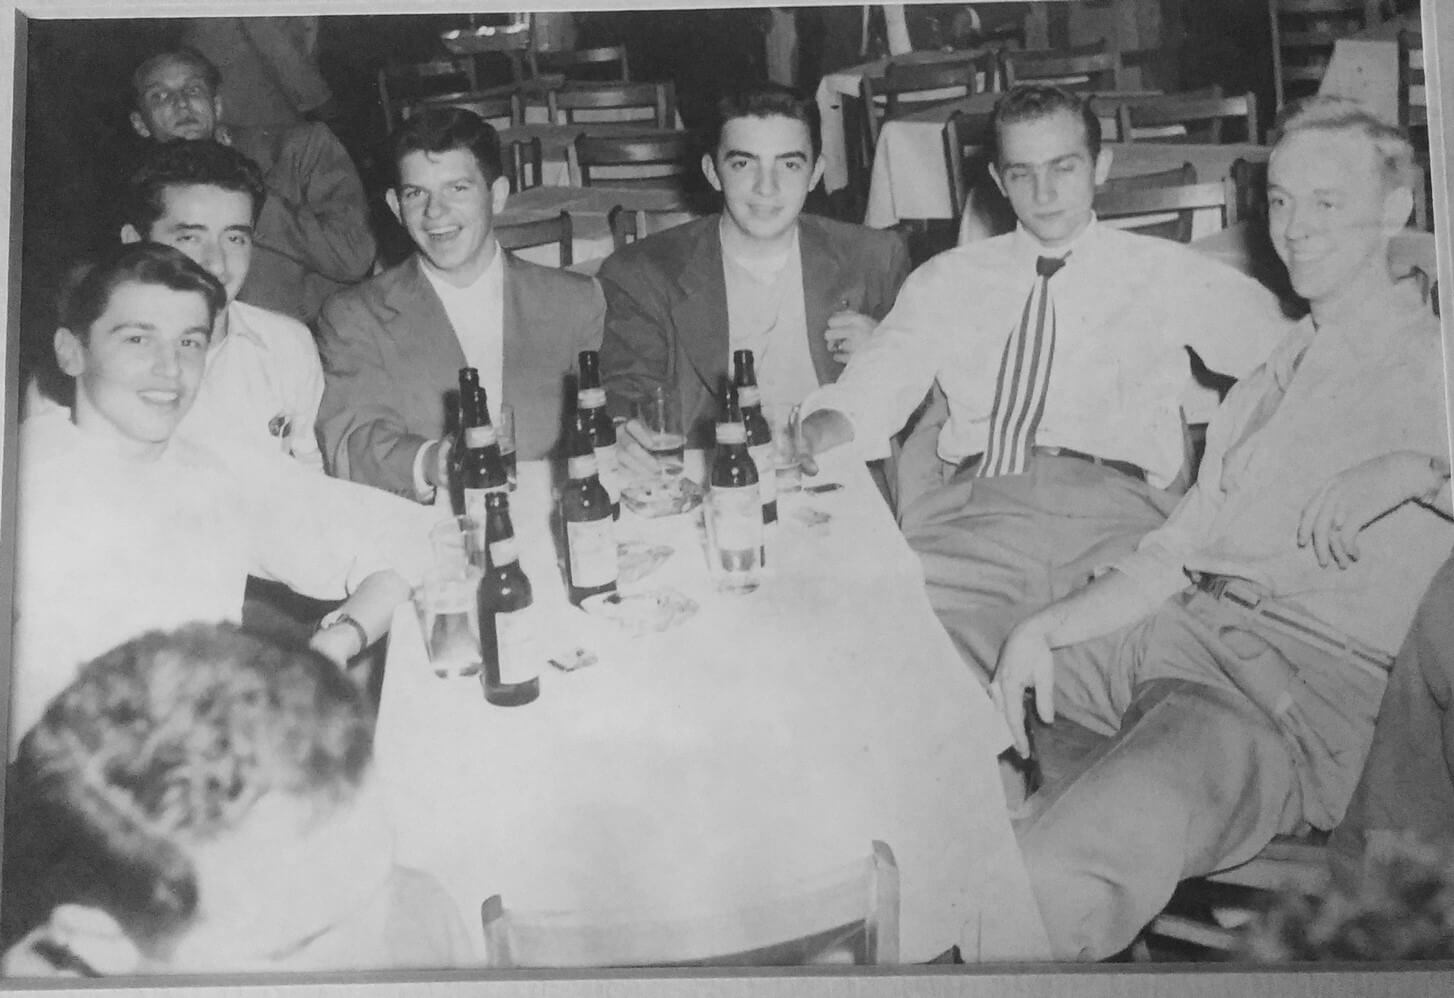 Dad out on the town with St. Louis University buddies, 1950